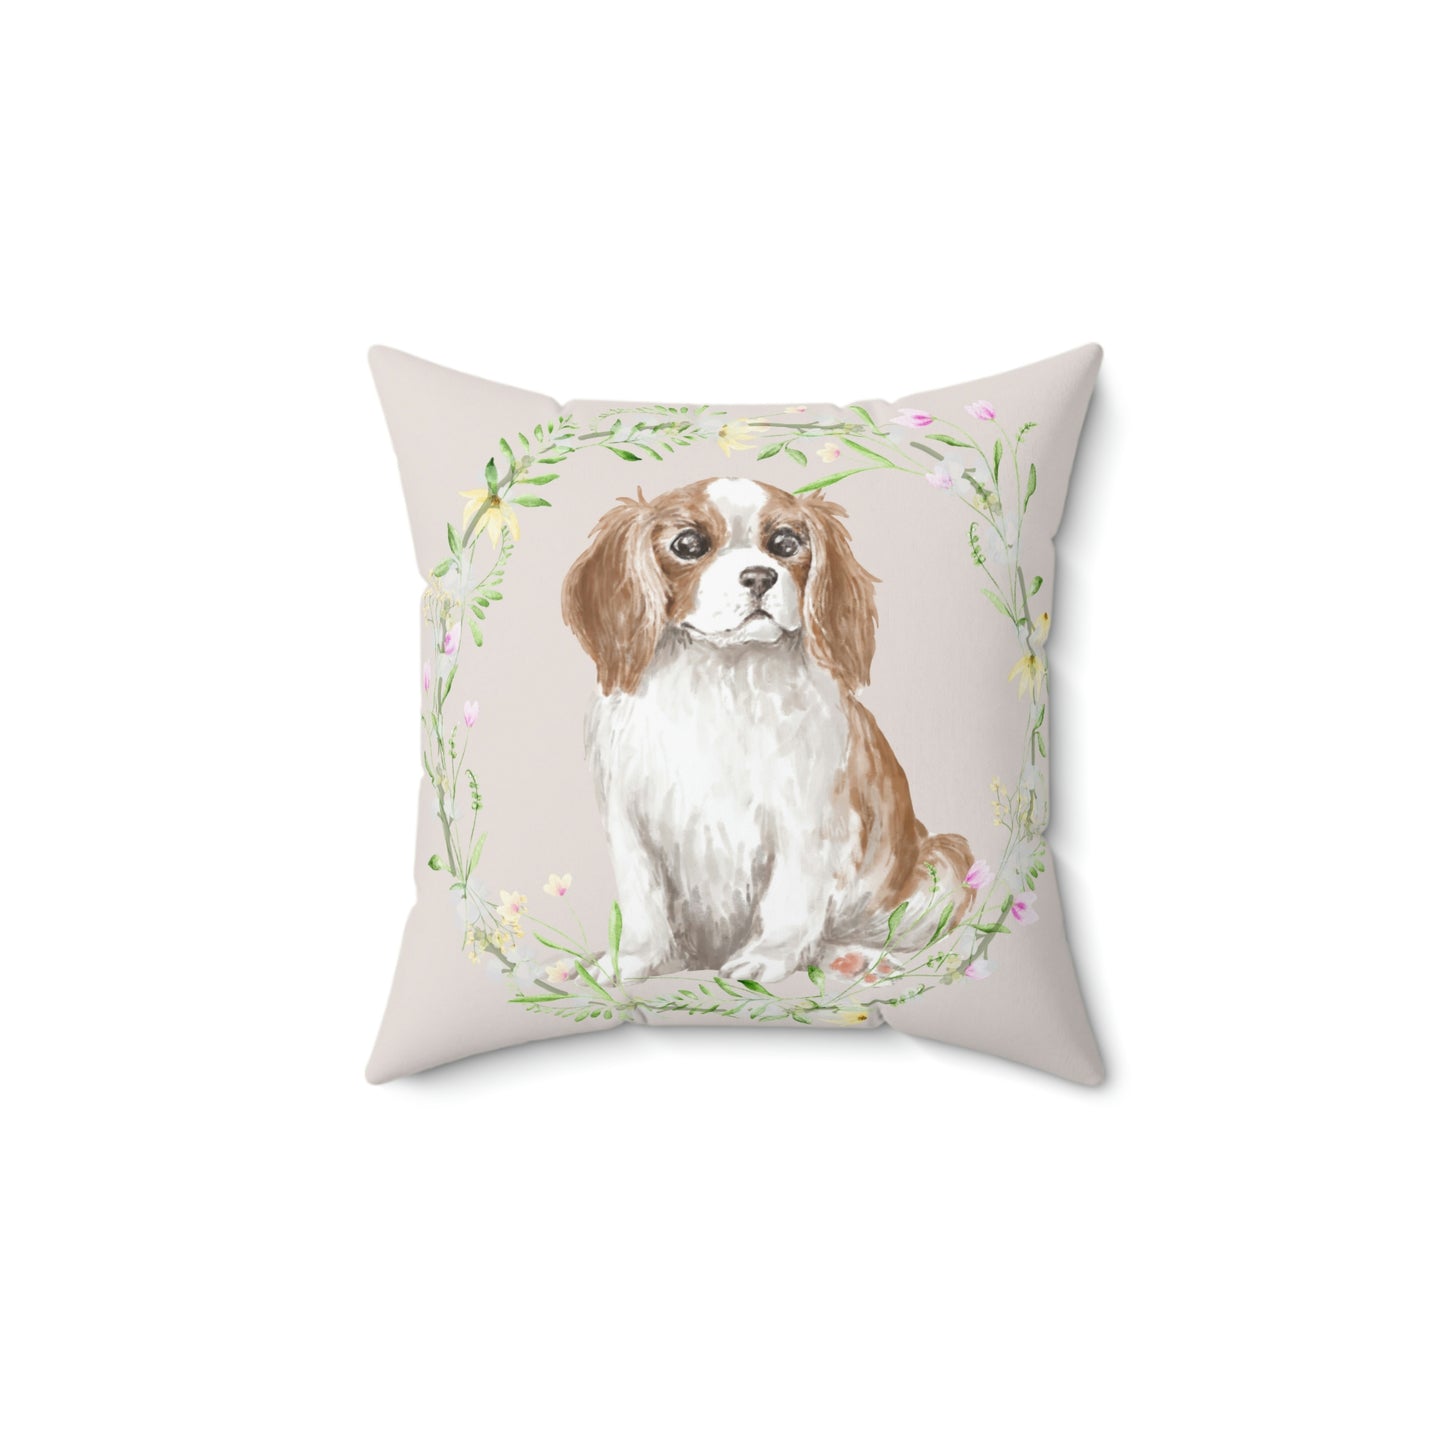 Cavalier dog/Spaniel Dog with Floral Wreath design Spun Polyester Square Indoor Pillow